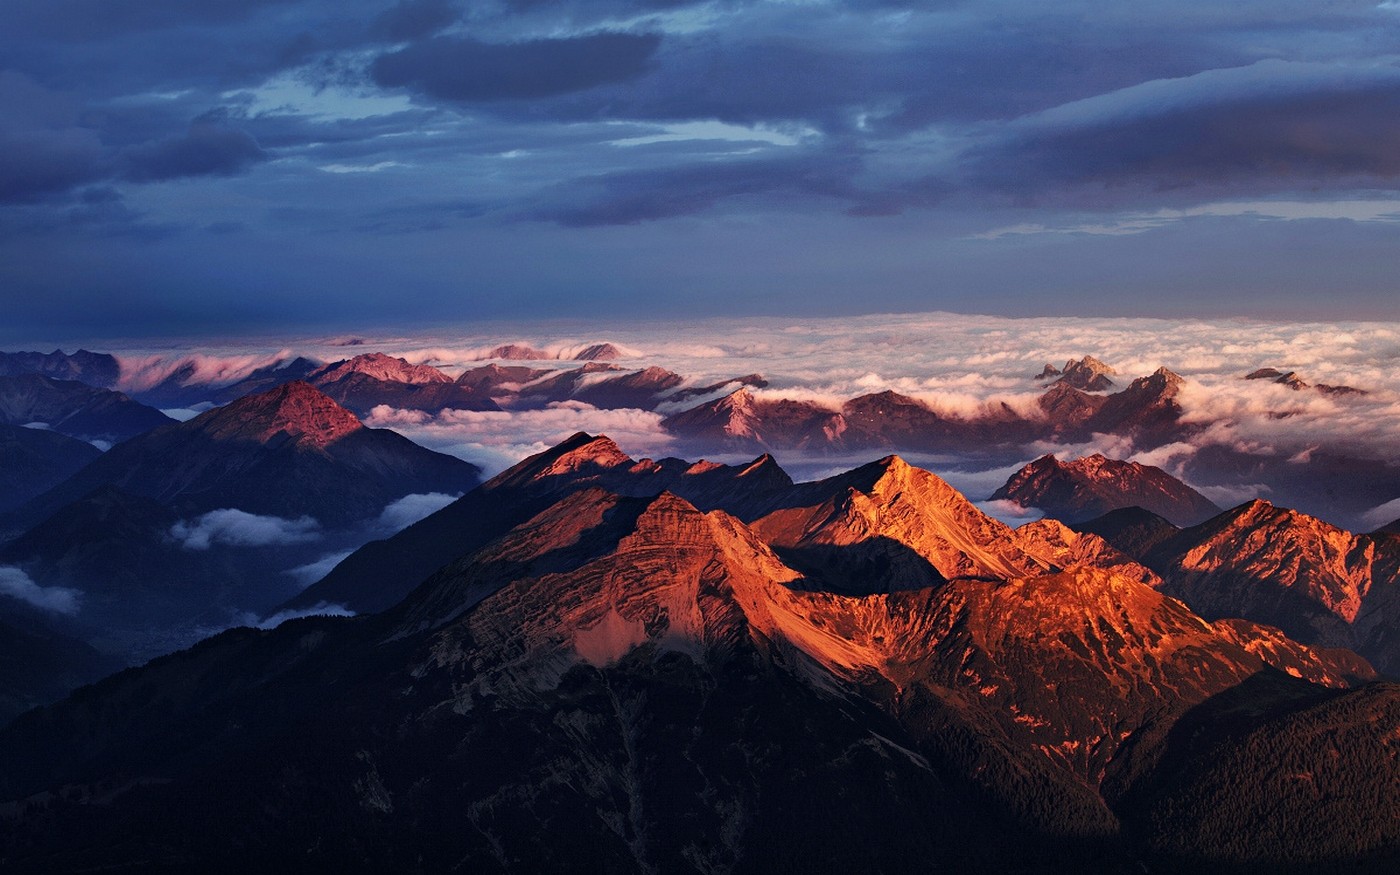 General 1400x875 nature landscape mountains sunset Alps clouds sky summit summer Germany